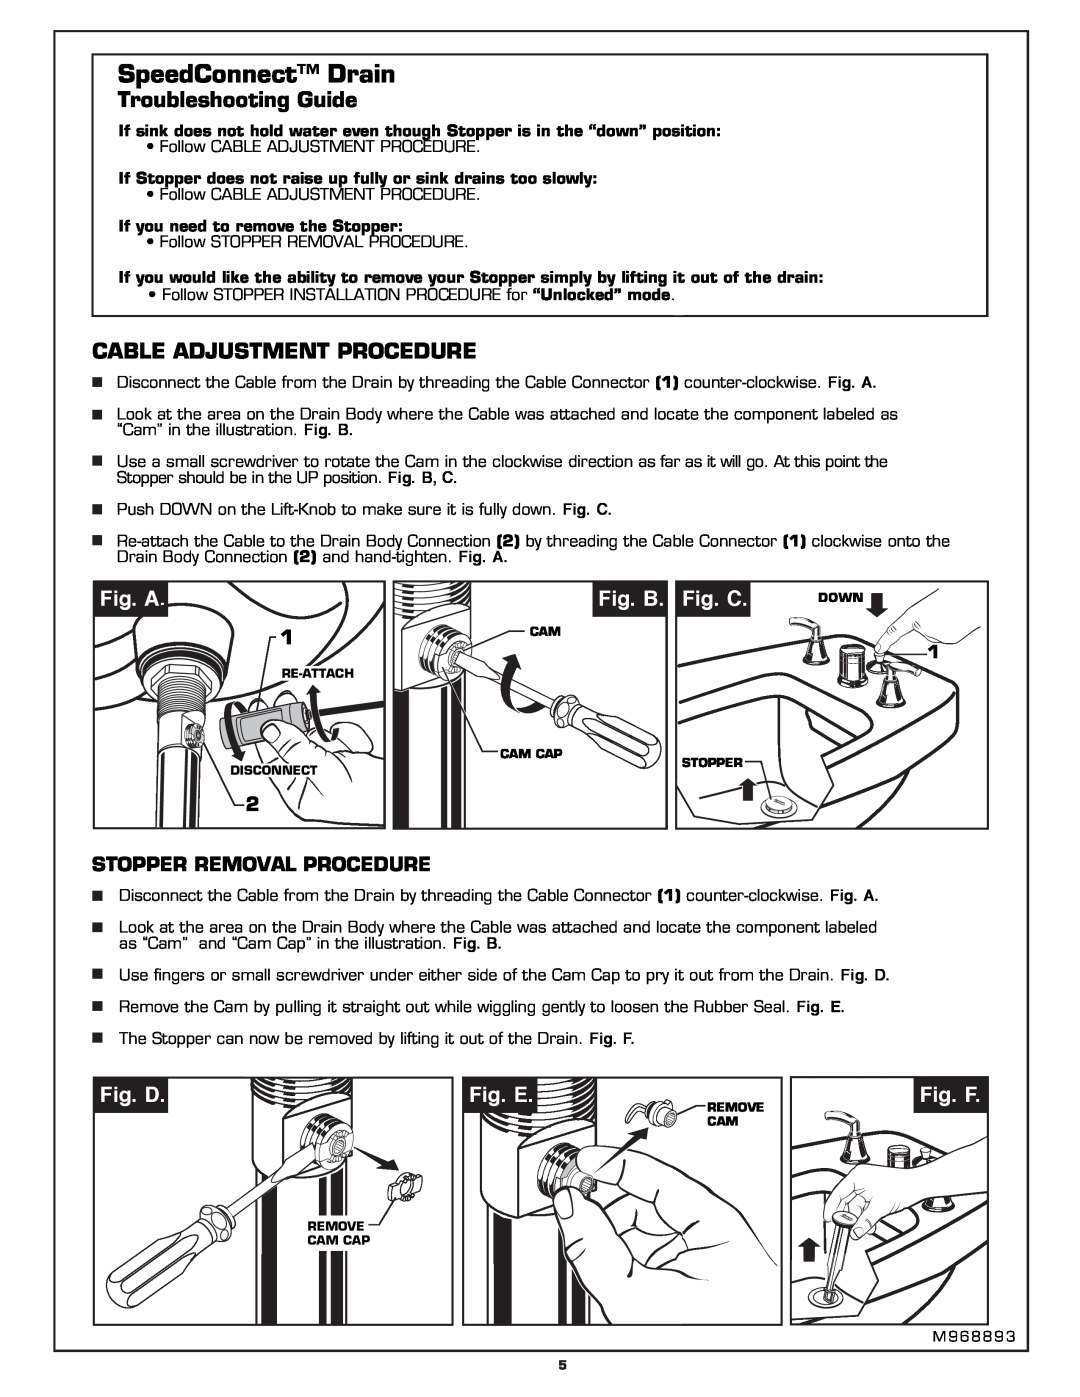 American Standard 7038.400 SpeedConnect Drain, Troubleshooting Guide, Cable Adjustment Procedure, Fig. A, Fig. B, Fig. C 